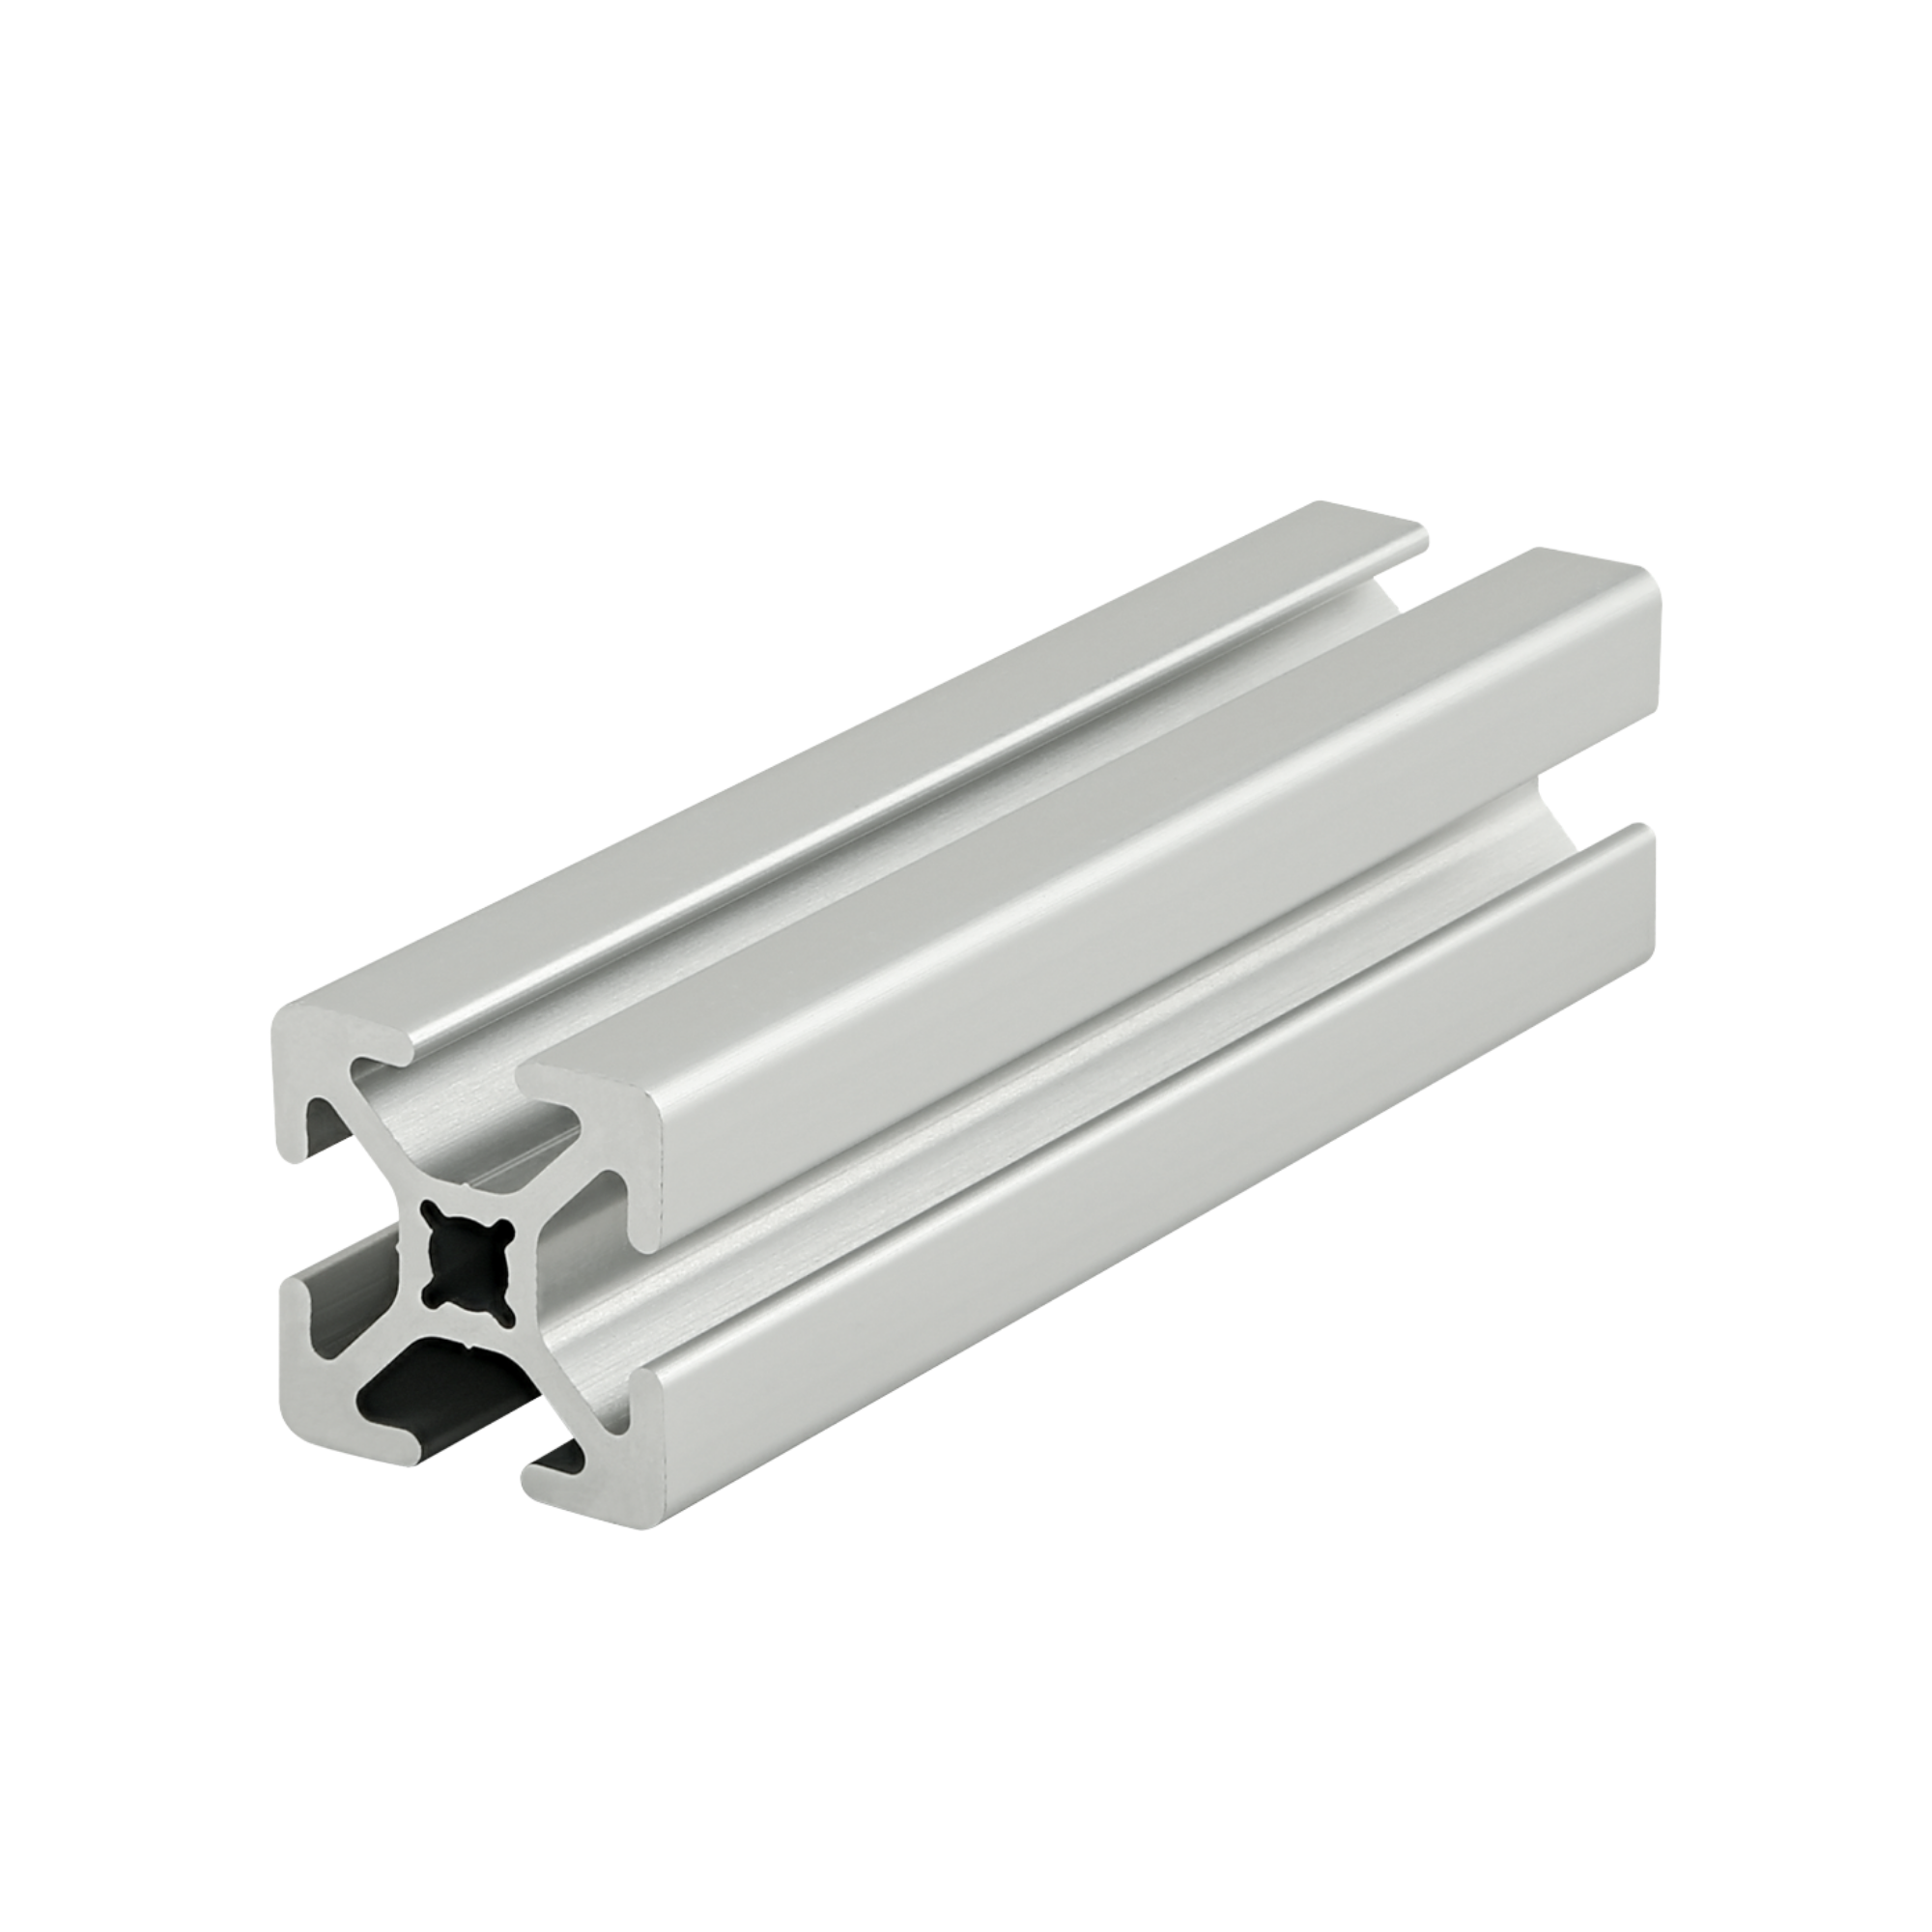 front side view of a metal bar with square edges and a T-slot on each of the four sides